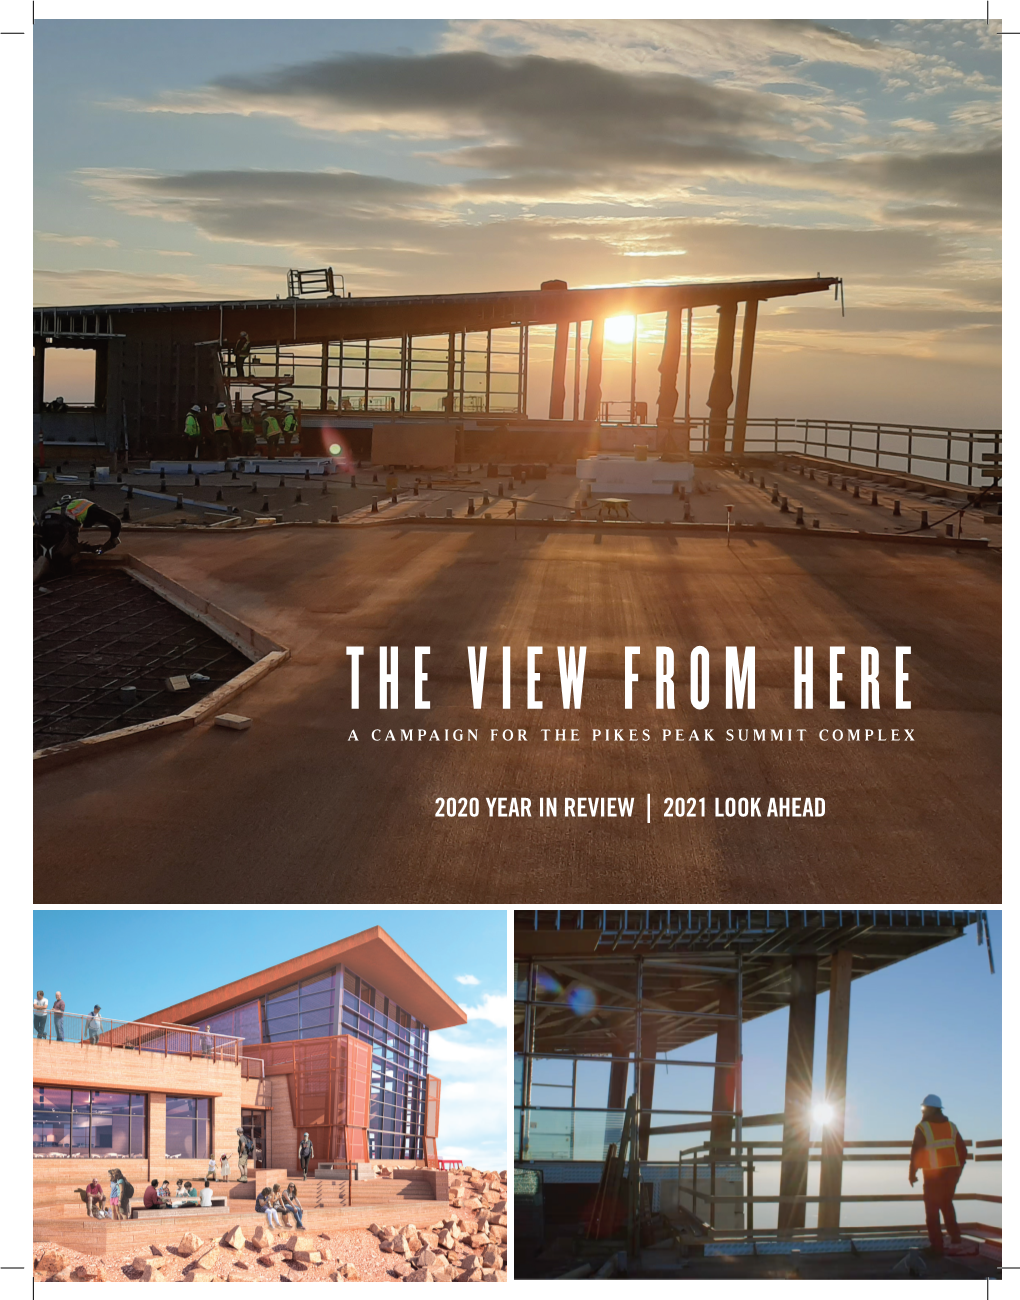 2020 Year in Review | 2021 Look Ahead 2020 Year in Review - Pikes Peak Summit Complex